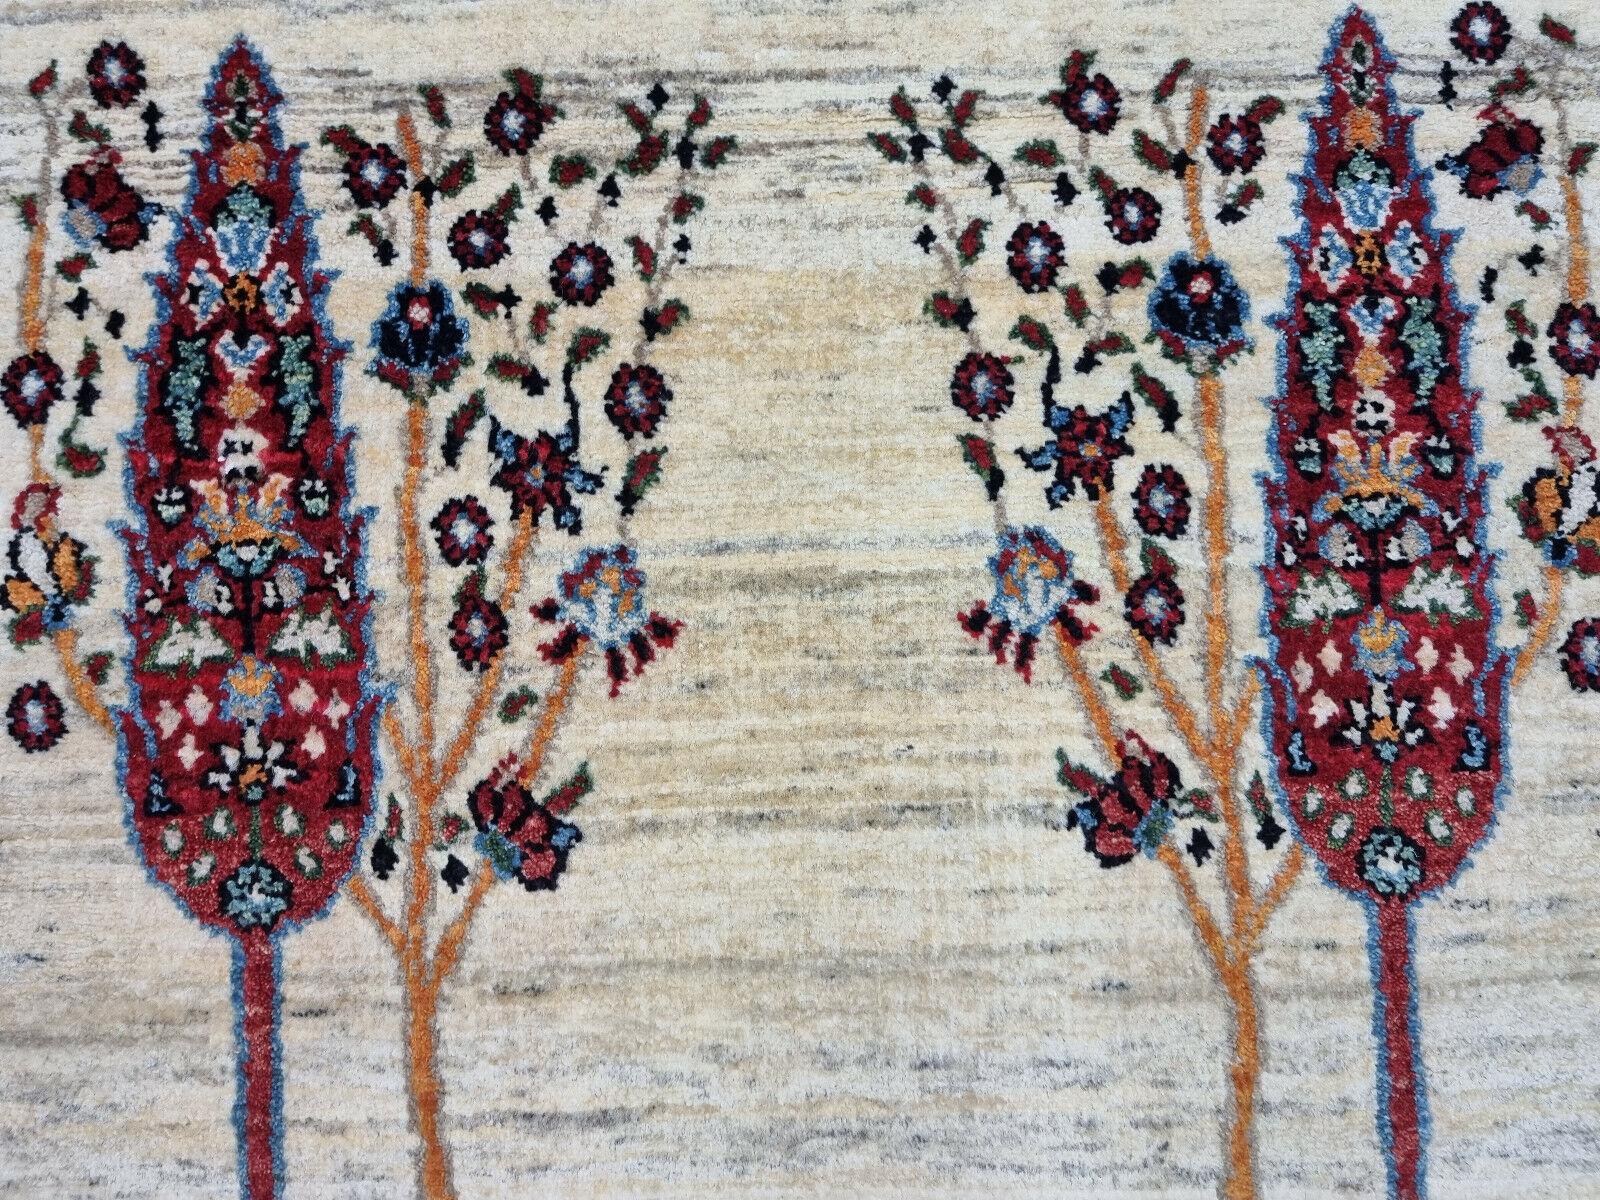 Design: This handmade rug features an artistic representation of trees and foliage motifs. The design exudes a vintage charm.
Colors:
Base: The background color is a faded beige, contributing to its vintage appearance.
Tree Motifs: Prominent tree